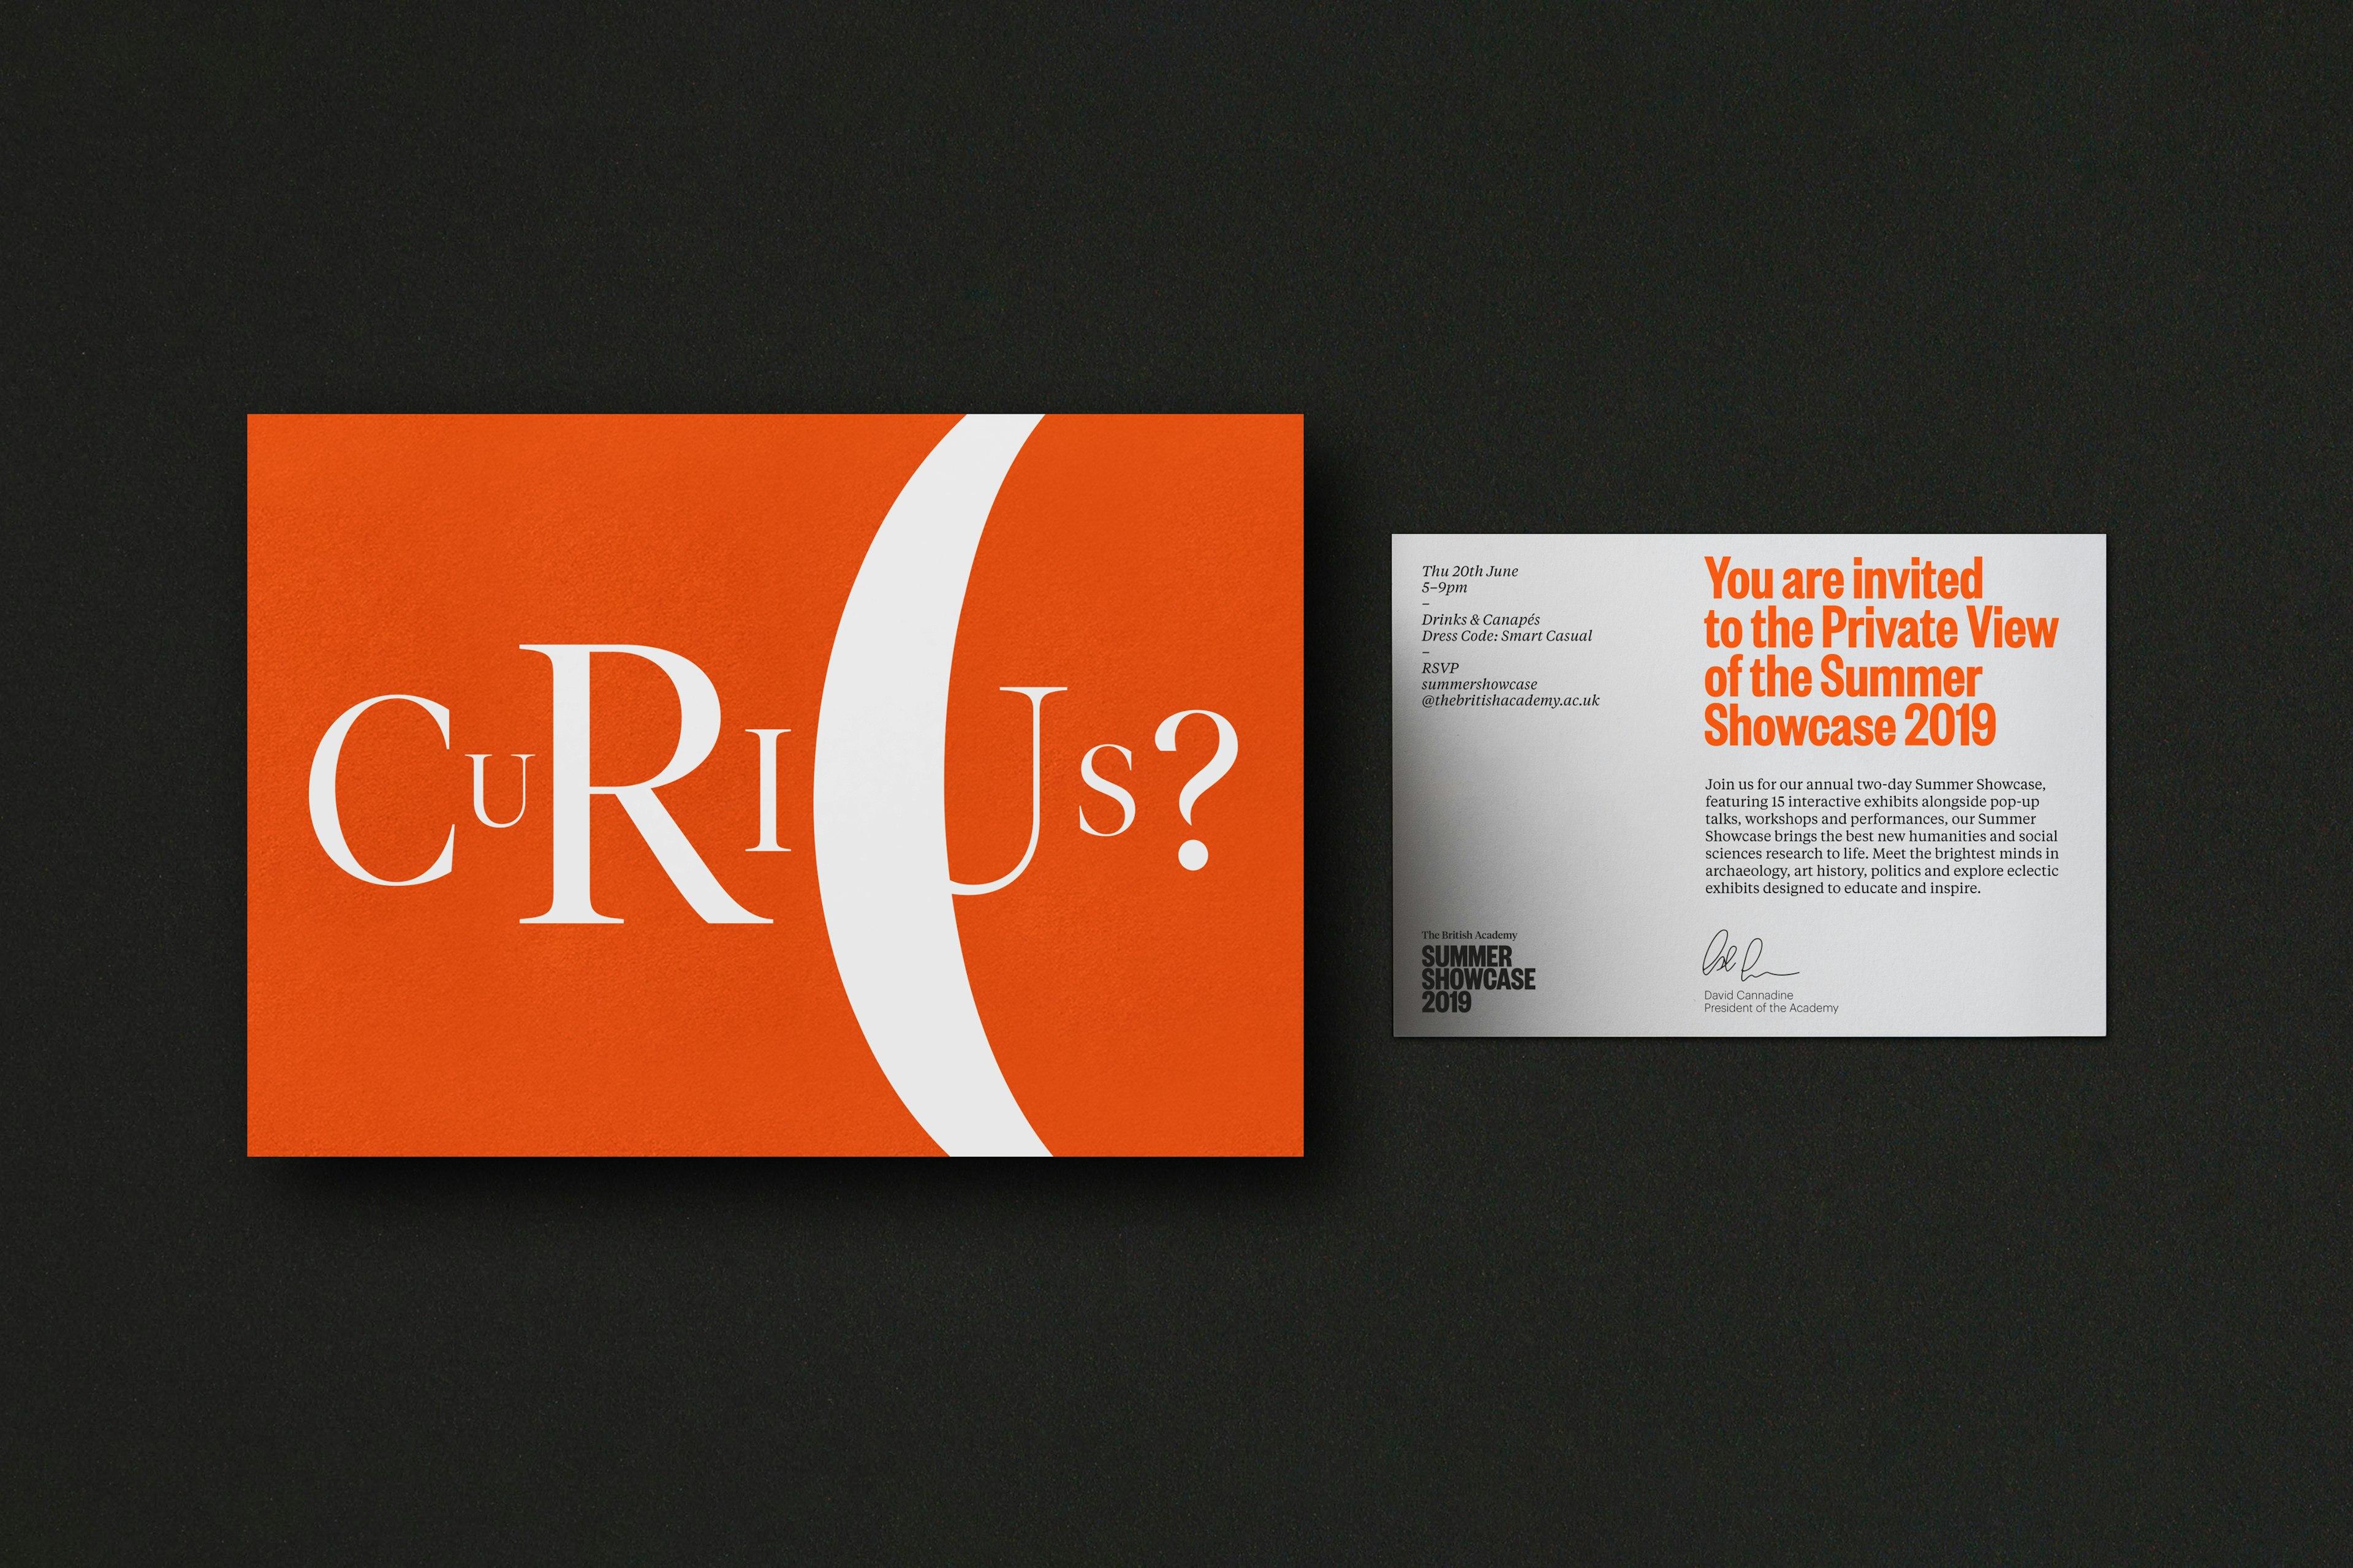 A design for an invitation to the British Academy Summer Showcase.